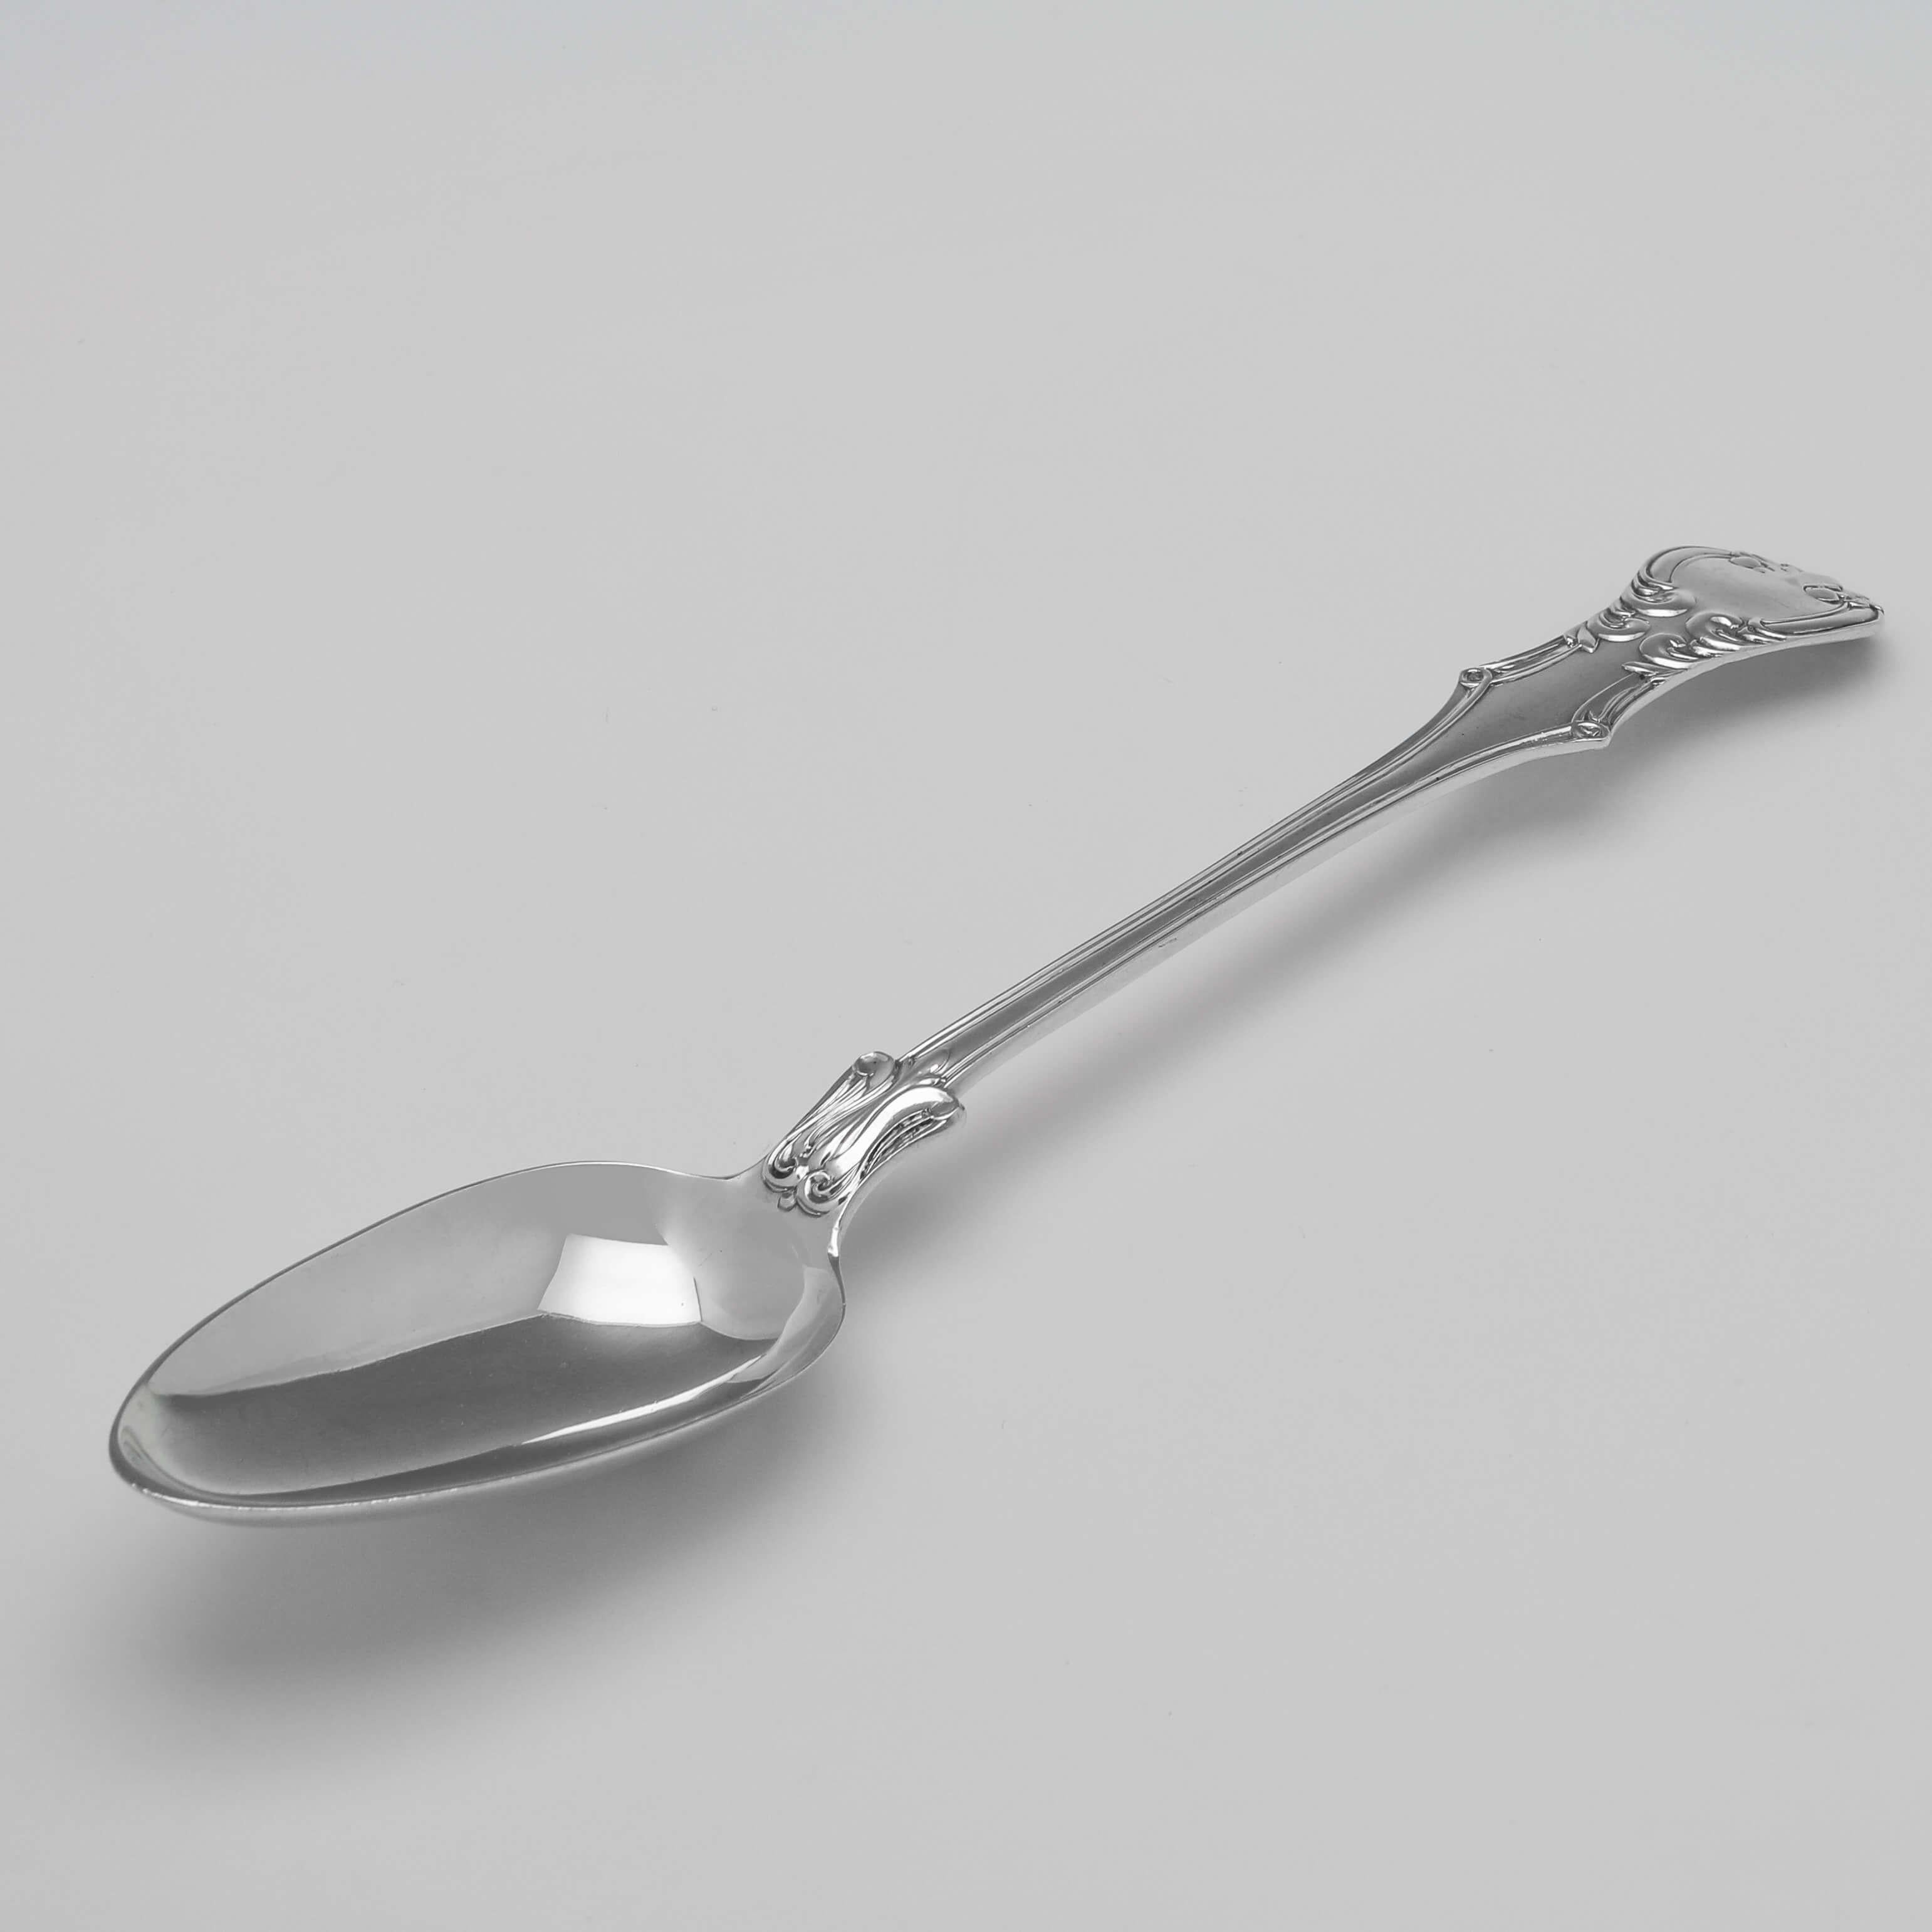 Hallmarked in London in 1855 by Henry Holland, this Victorian, Antique Sterling Silver Basting Spoon, is in 'Victoria' pattern. 

The basting spoon measures 12